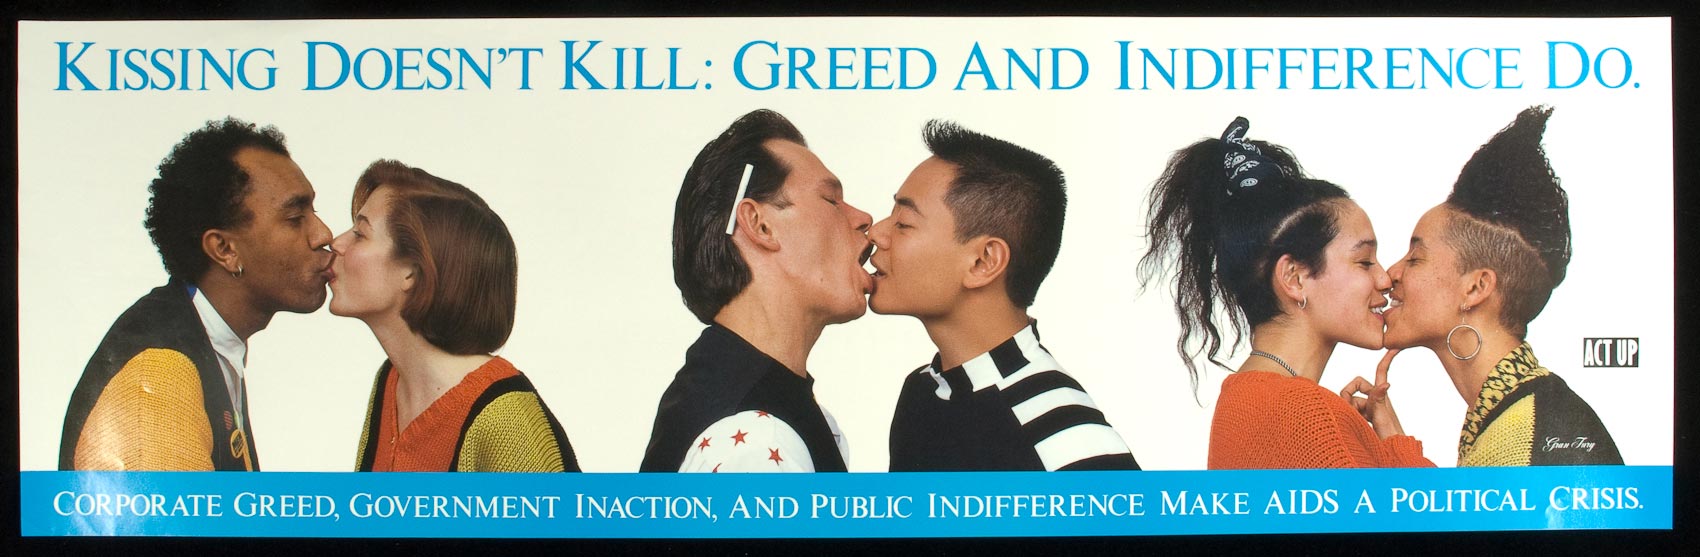 Three couples of different genders and ethnicities kiss underneath the text, Kissing doesn't kill: Greed and indifference do.